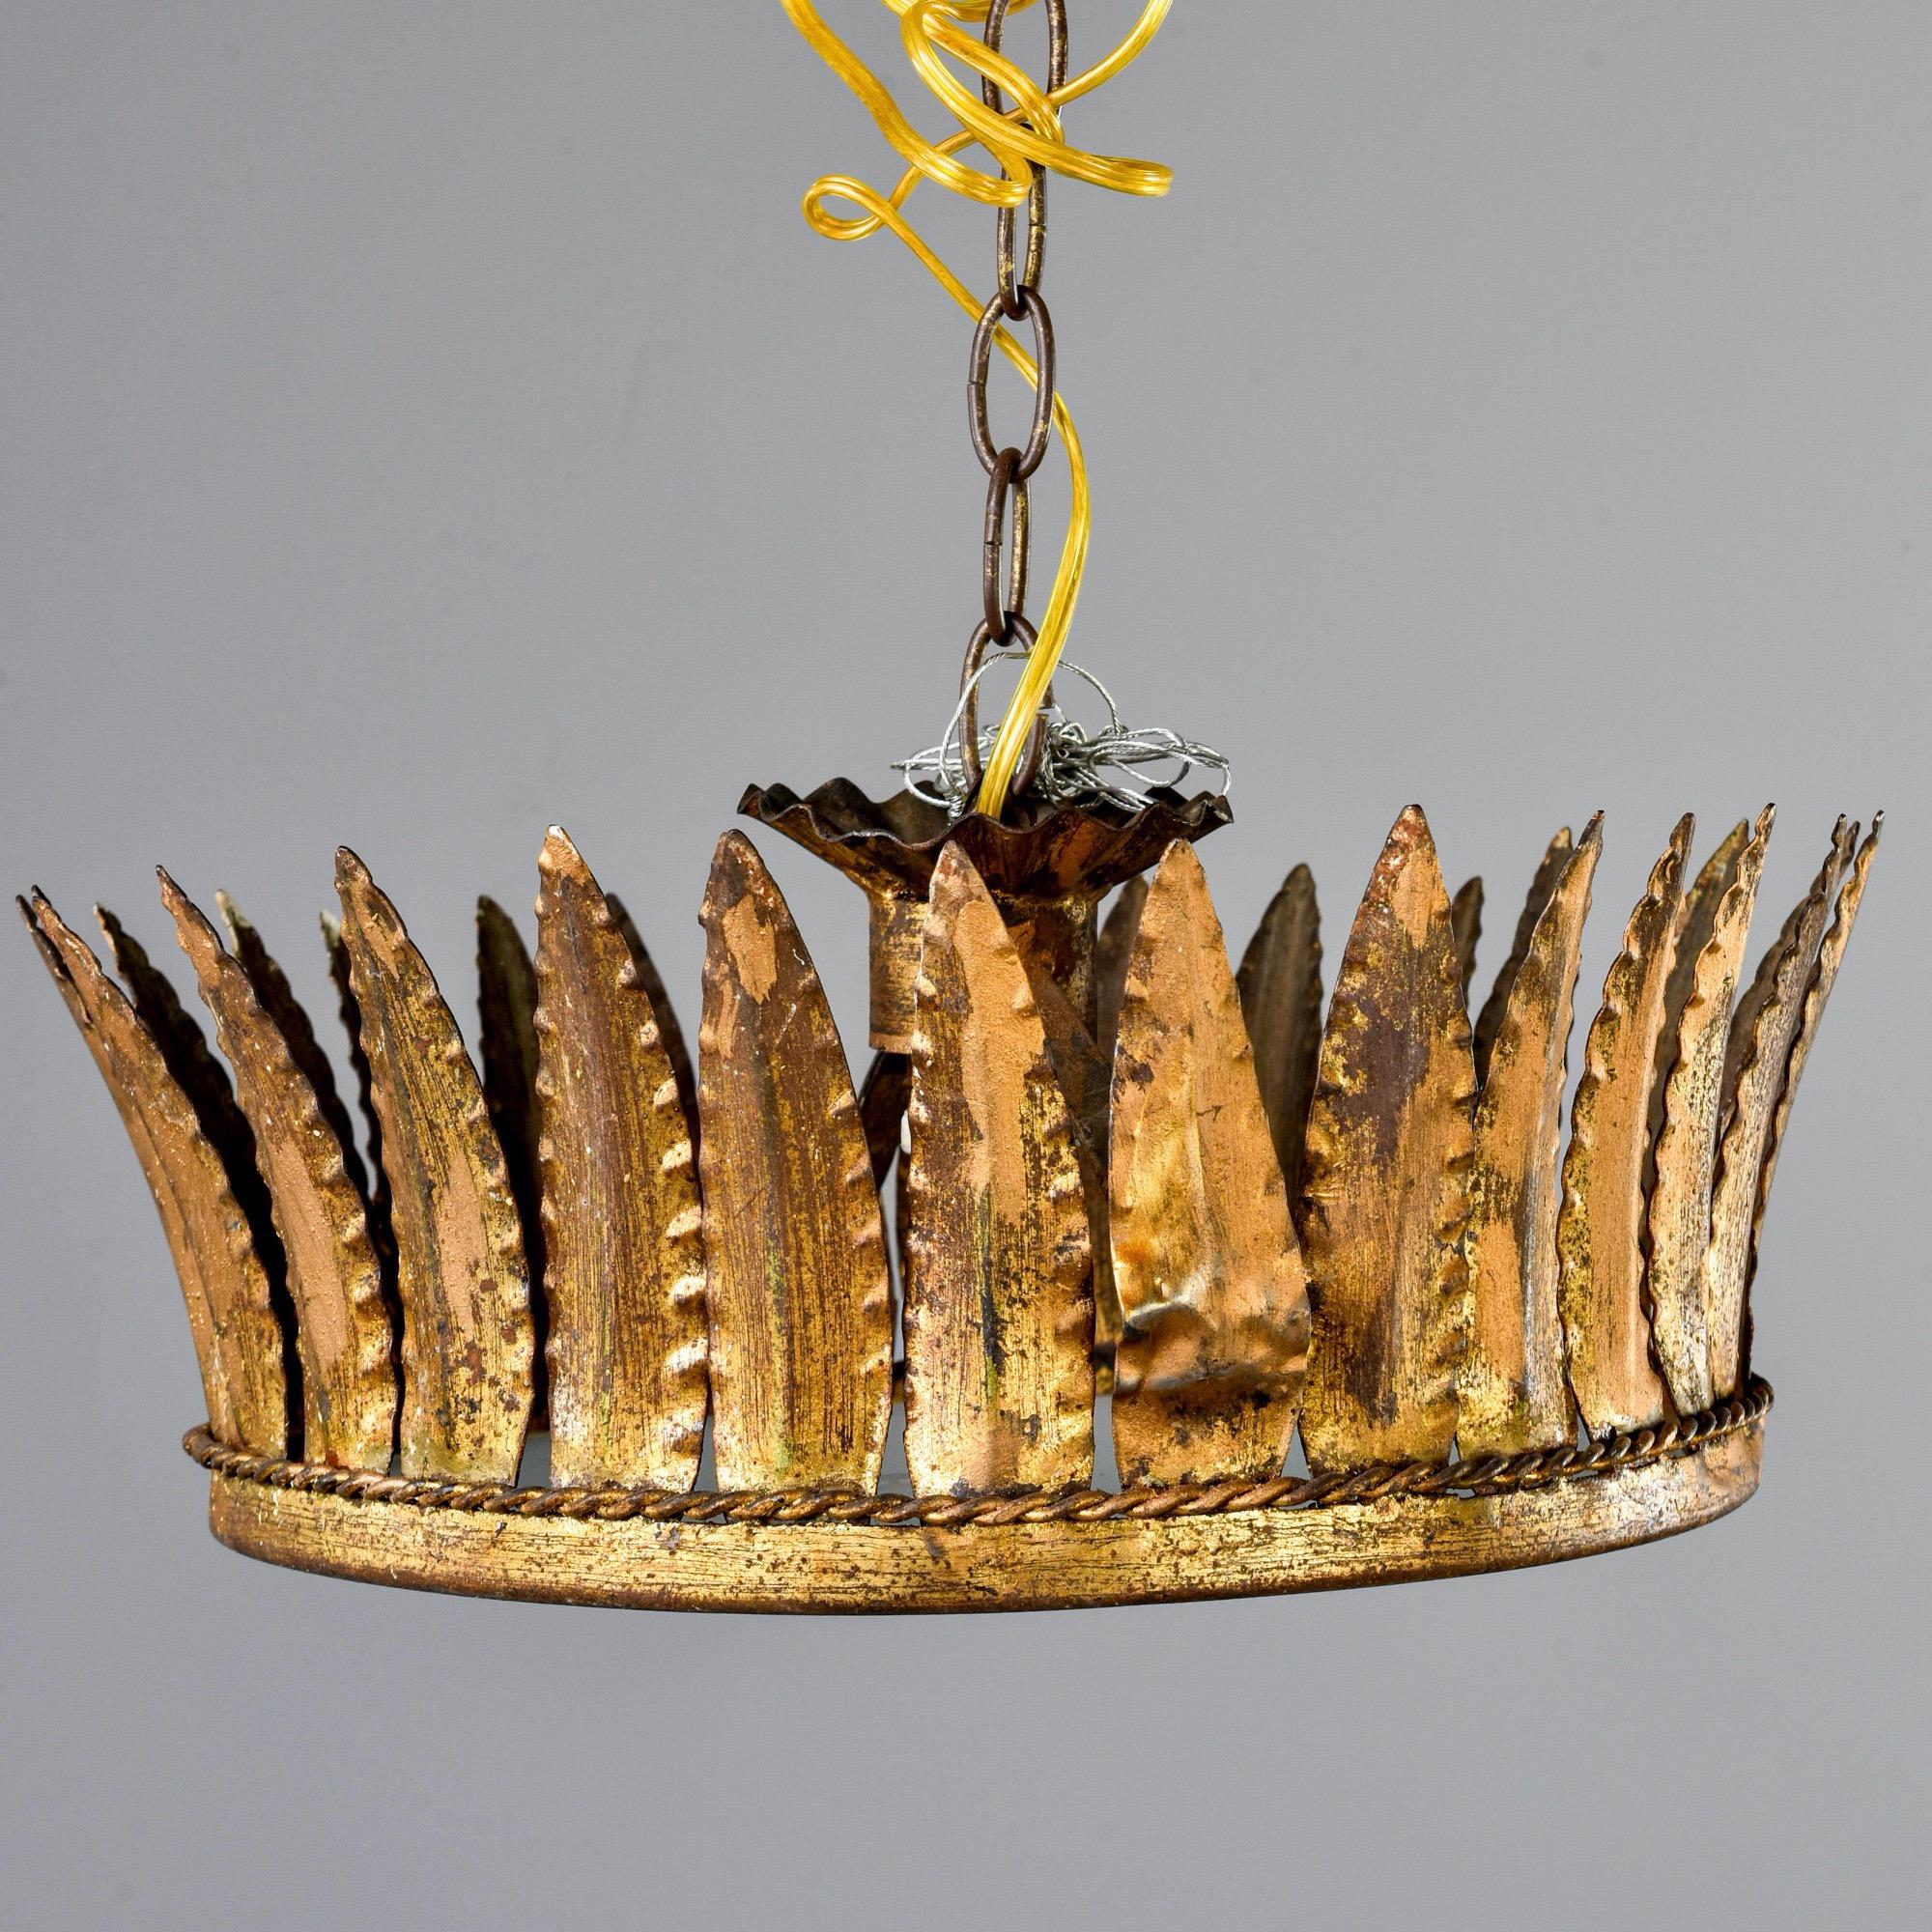 Spanish Gilt Metal Crown Ceiling Fixture For Sale 2